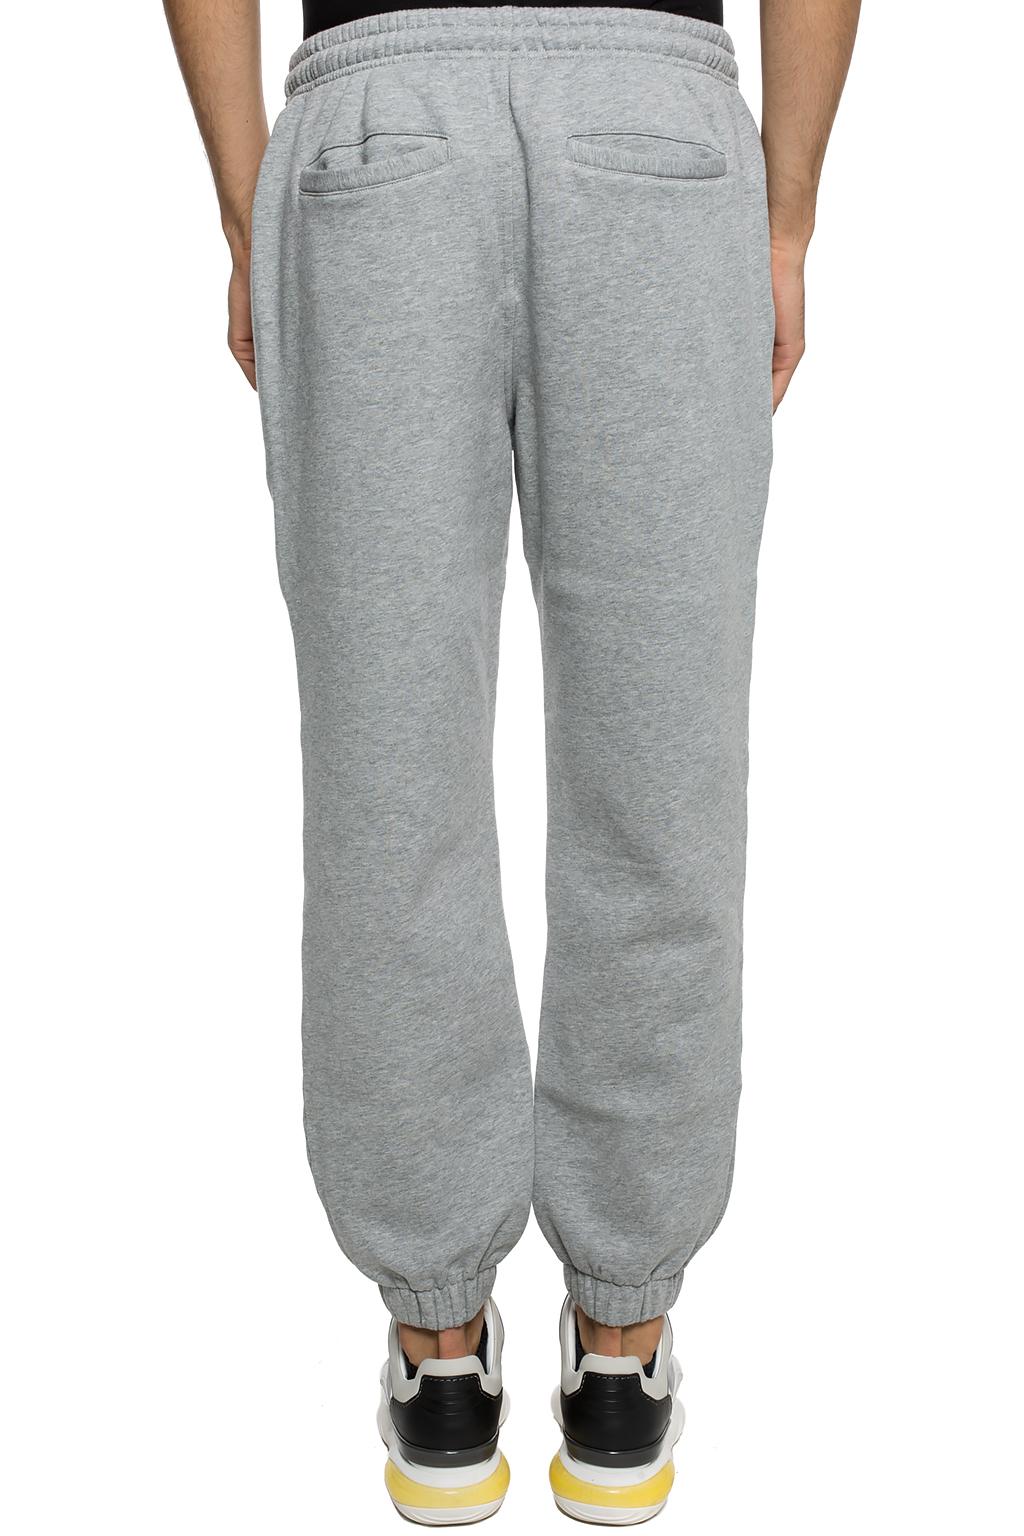 burberry embroidered sweatpants